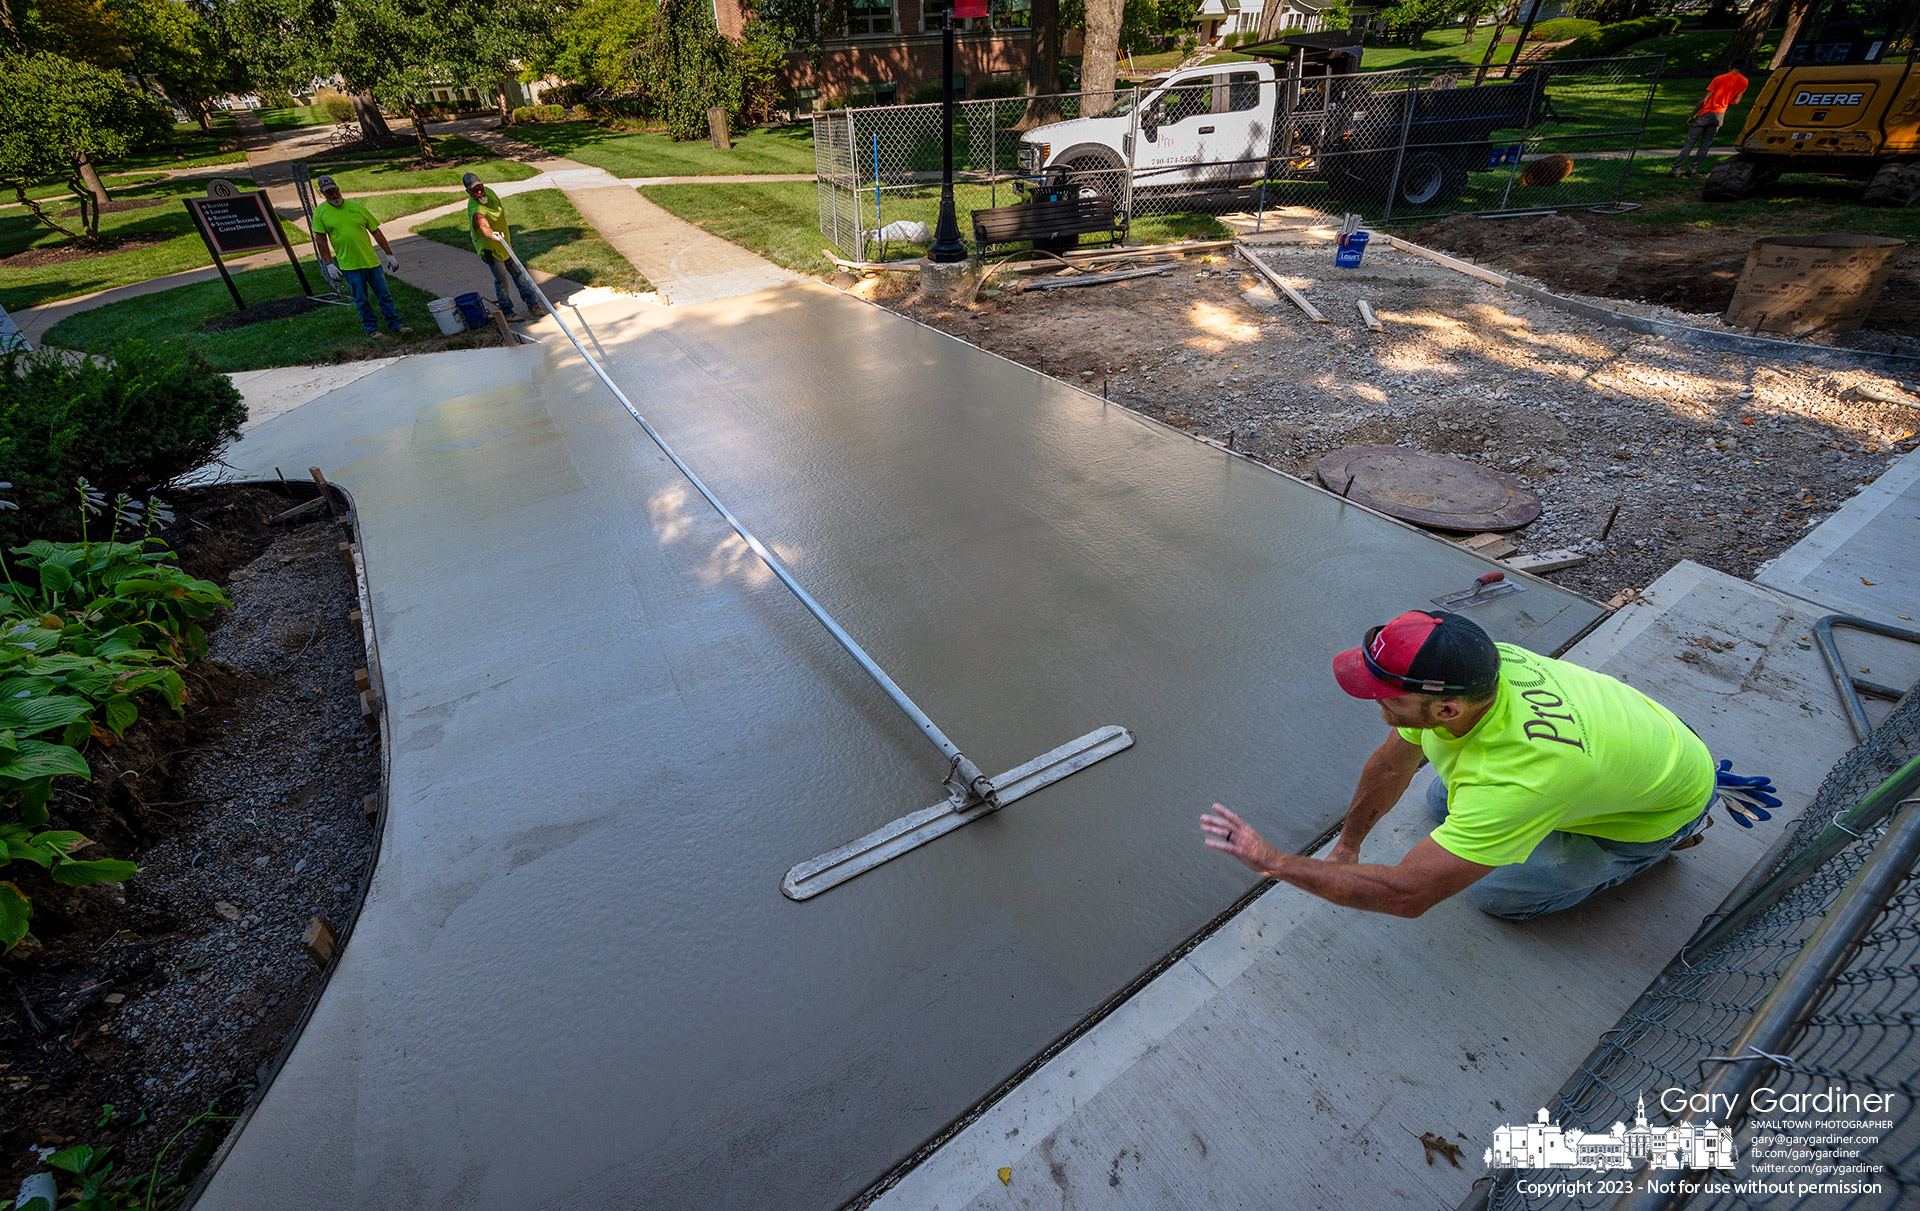 A contractor signals as a bull float levels a large section of concrete sidewalk poured at Towers Hall on the Otterbein University campus where repairs to old and damaged high pressure steam pipes was recently completed. My Final Photo for August 28, 2023.